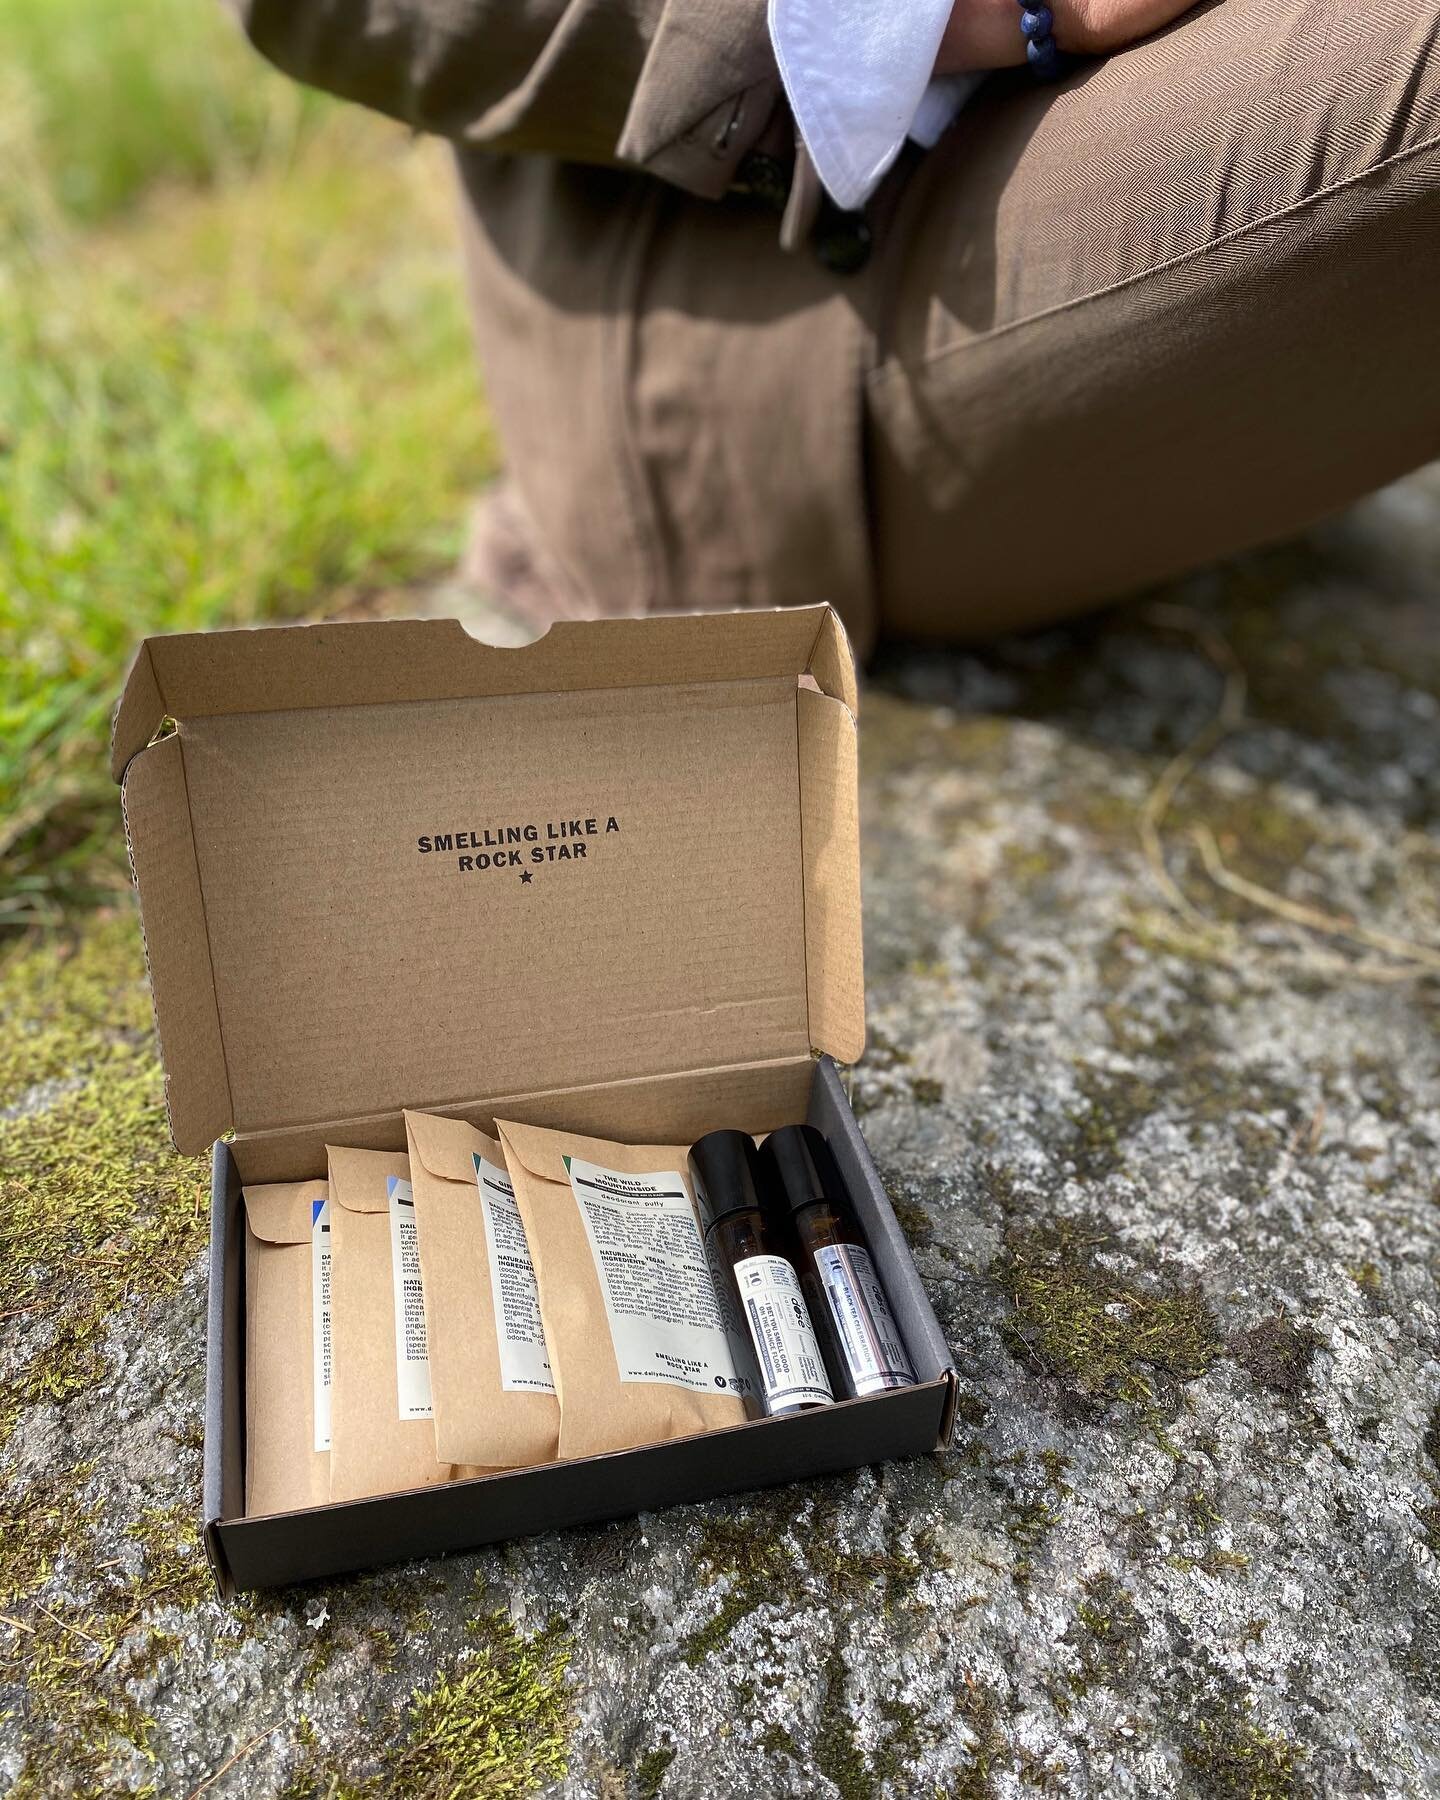 Hej Stockholmers! 

Now that summertime&rsquo;s in bloom, some of our local fans are choosing to have their orders hand delivered in the park near Daily Dose Naturally HQ.

Why not cut the cost and time for shipping, and come say hello?! 

Use passco